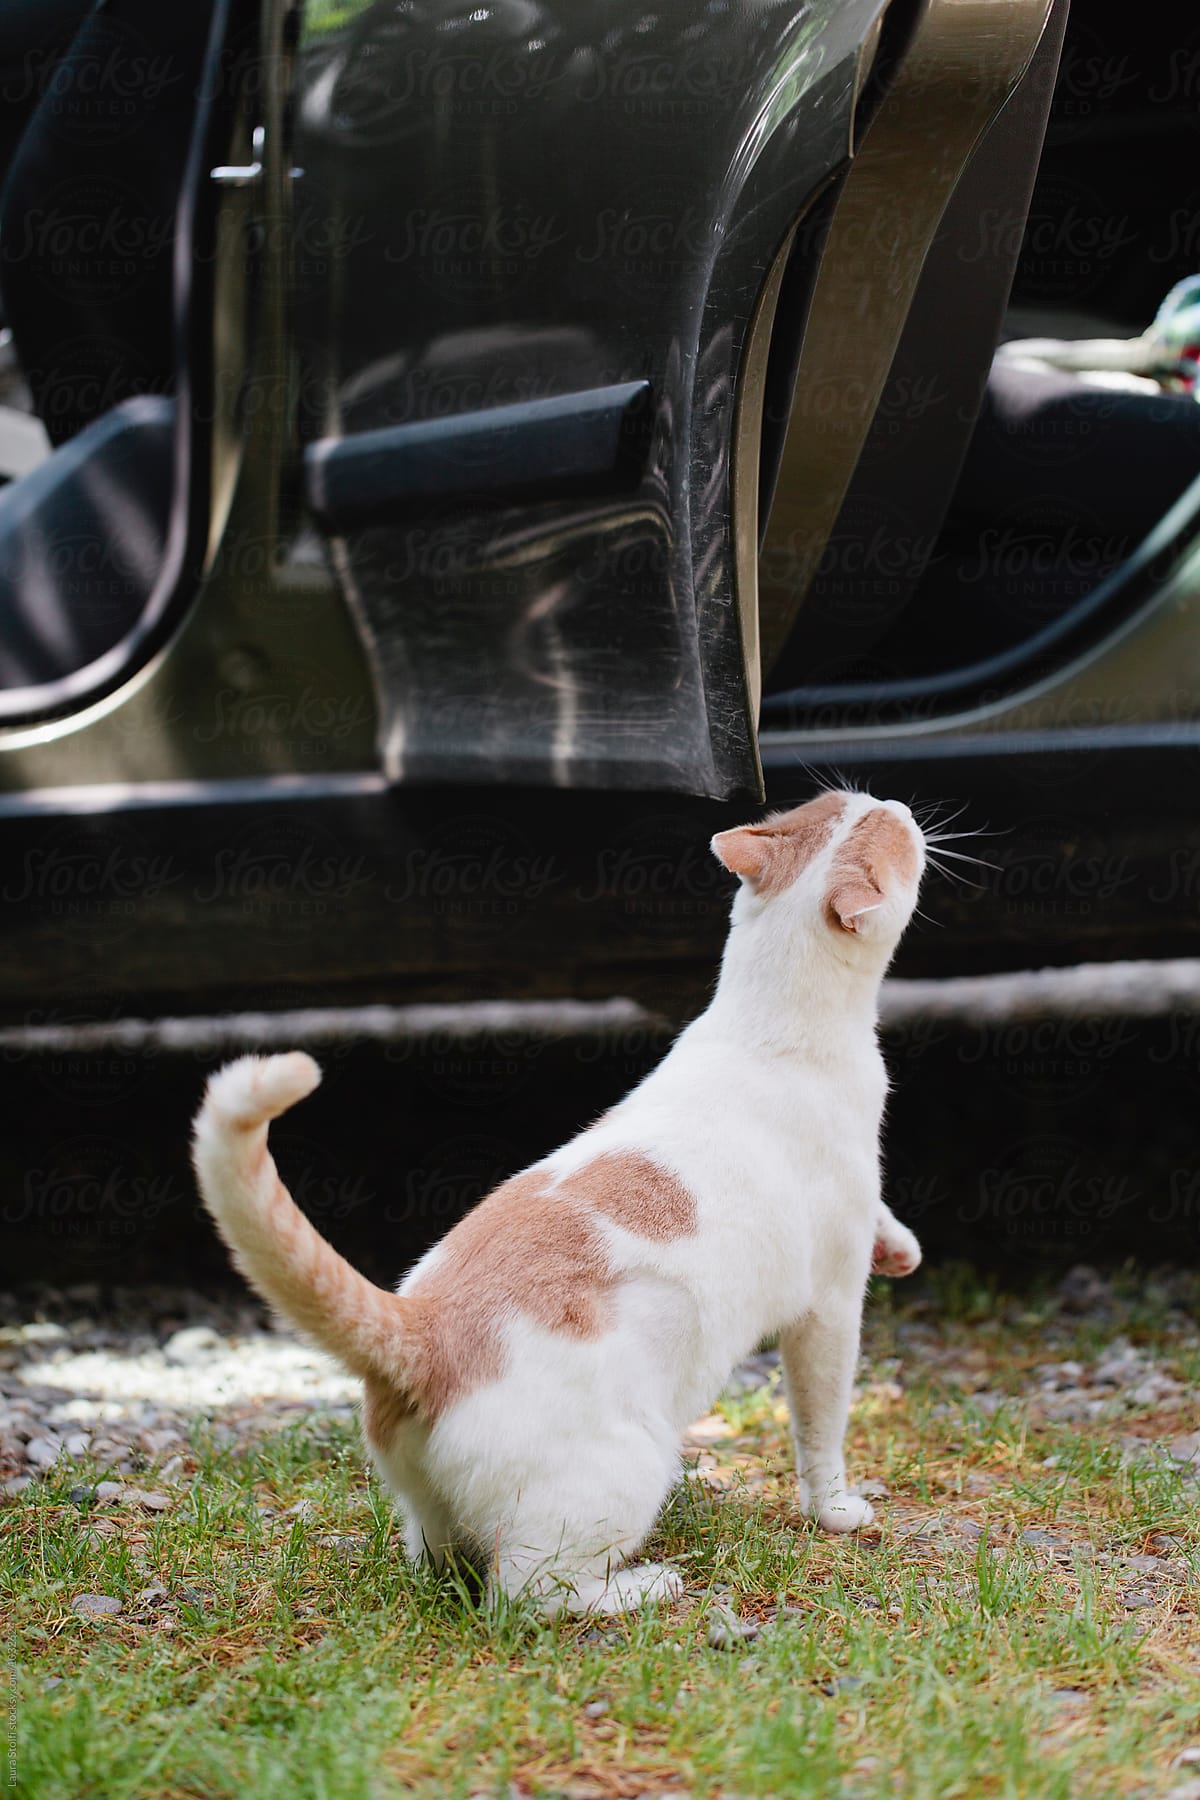 Cat ready to jump on car in garden